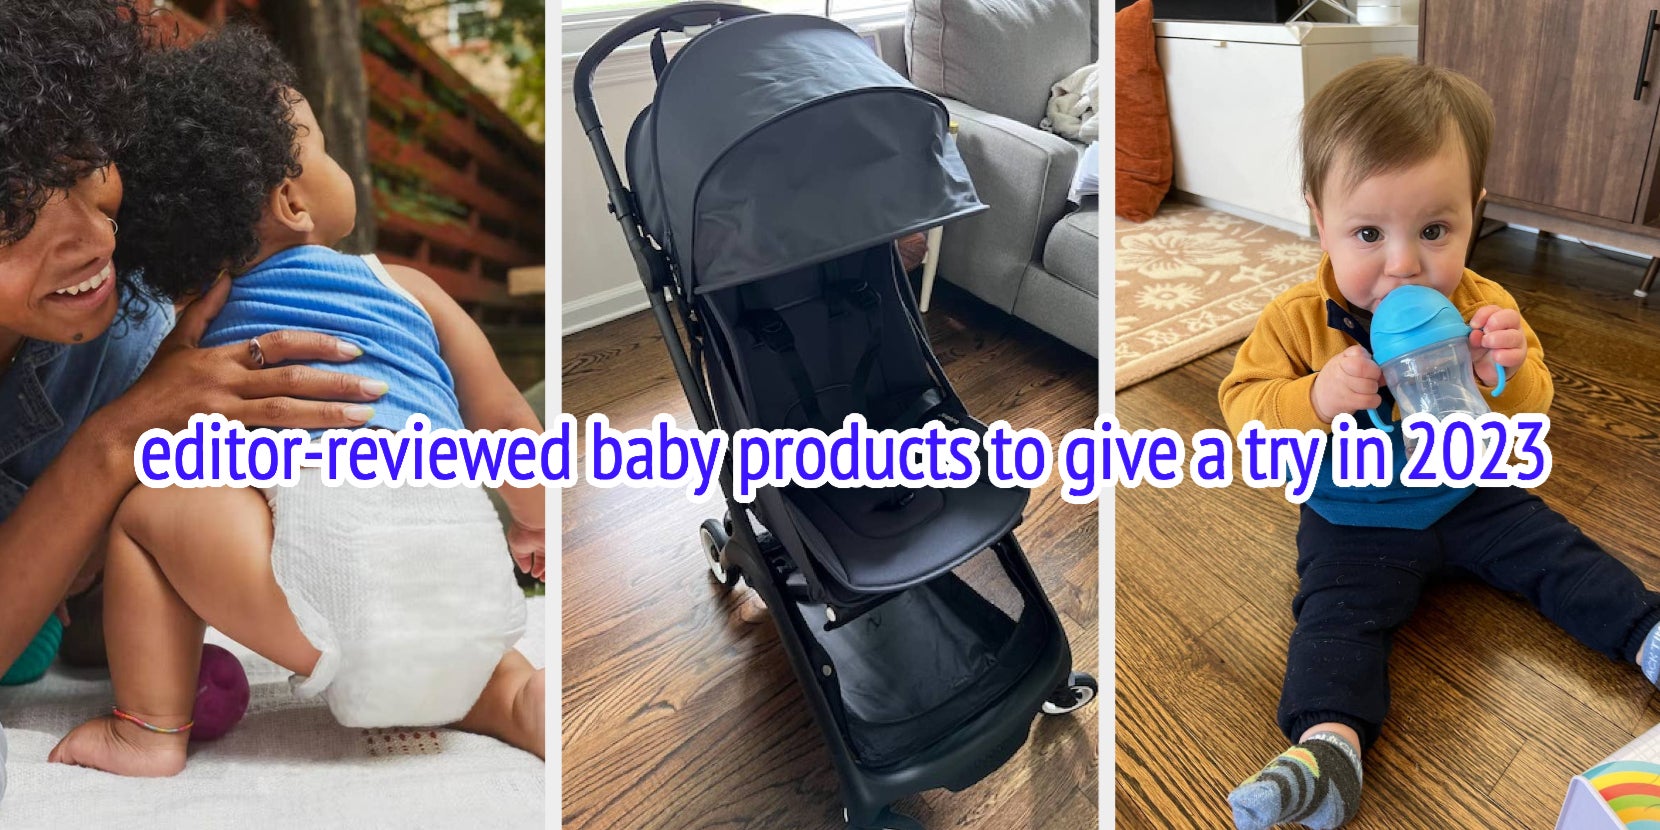 19 Baby Items You Can Buy With Pre-Tax Dollars in 2023